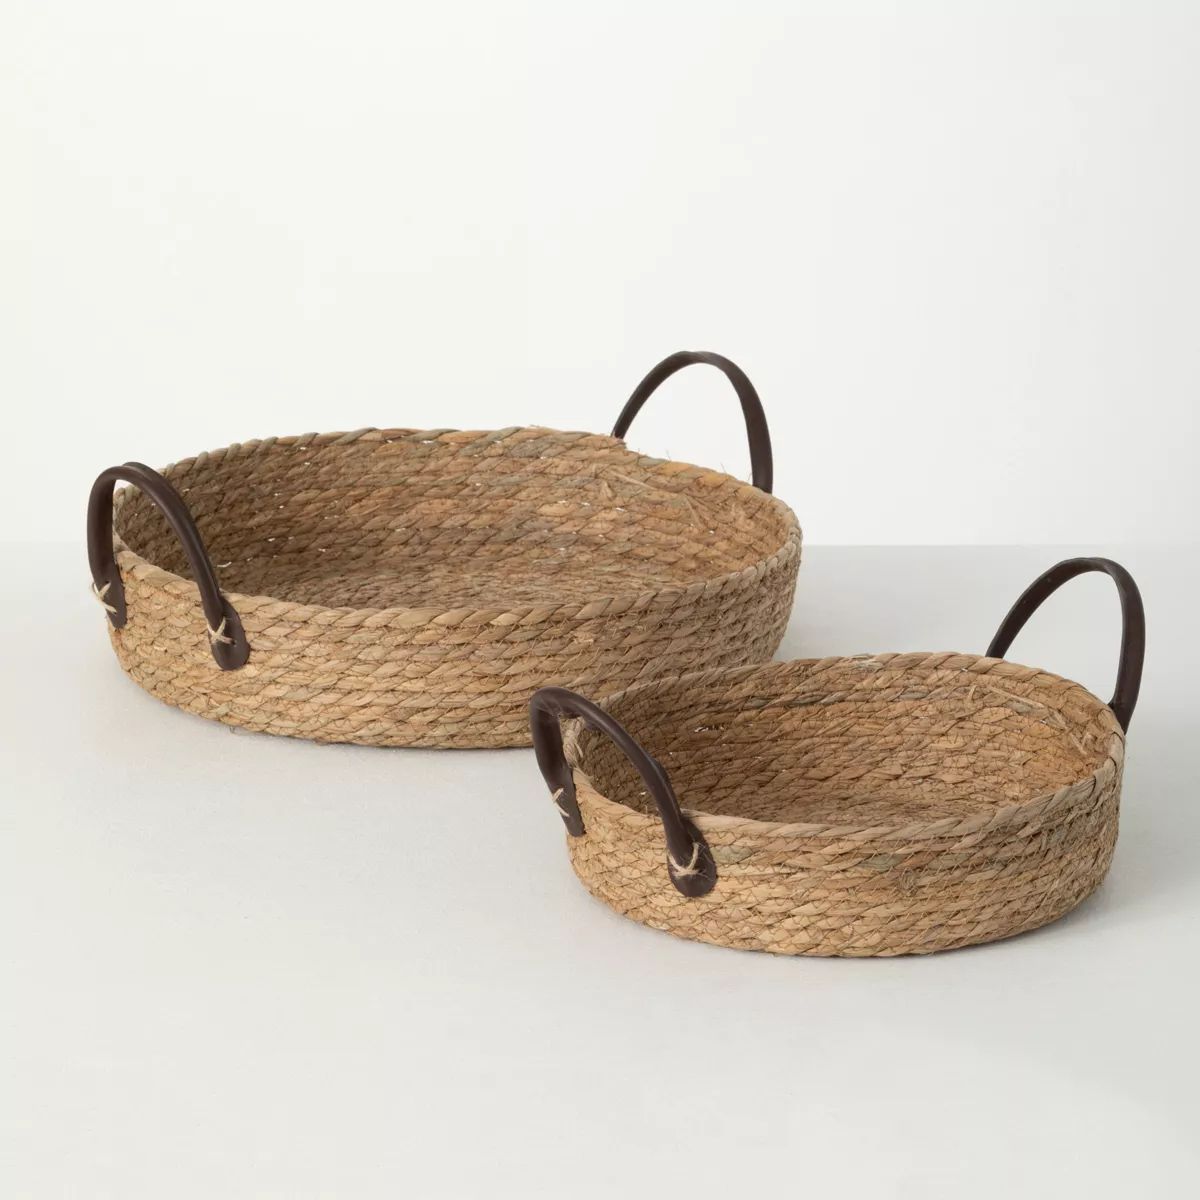 Sullivans Handled Woven Wicker Tray Set of 2, 6"H & 5.5"H Brown | Target